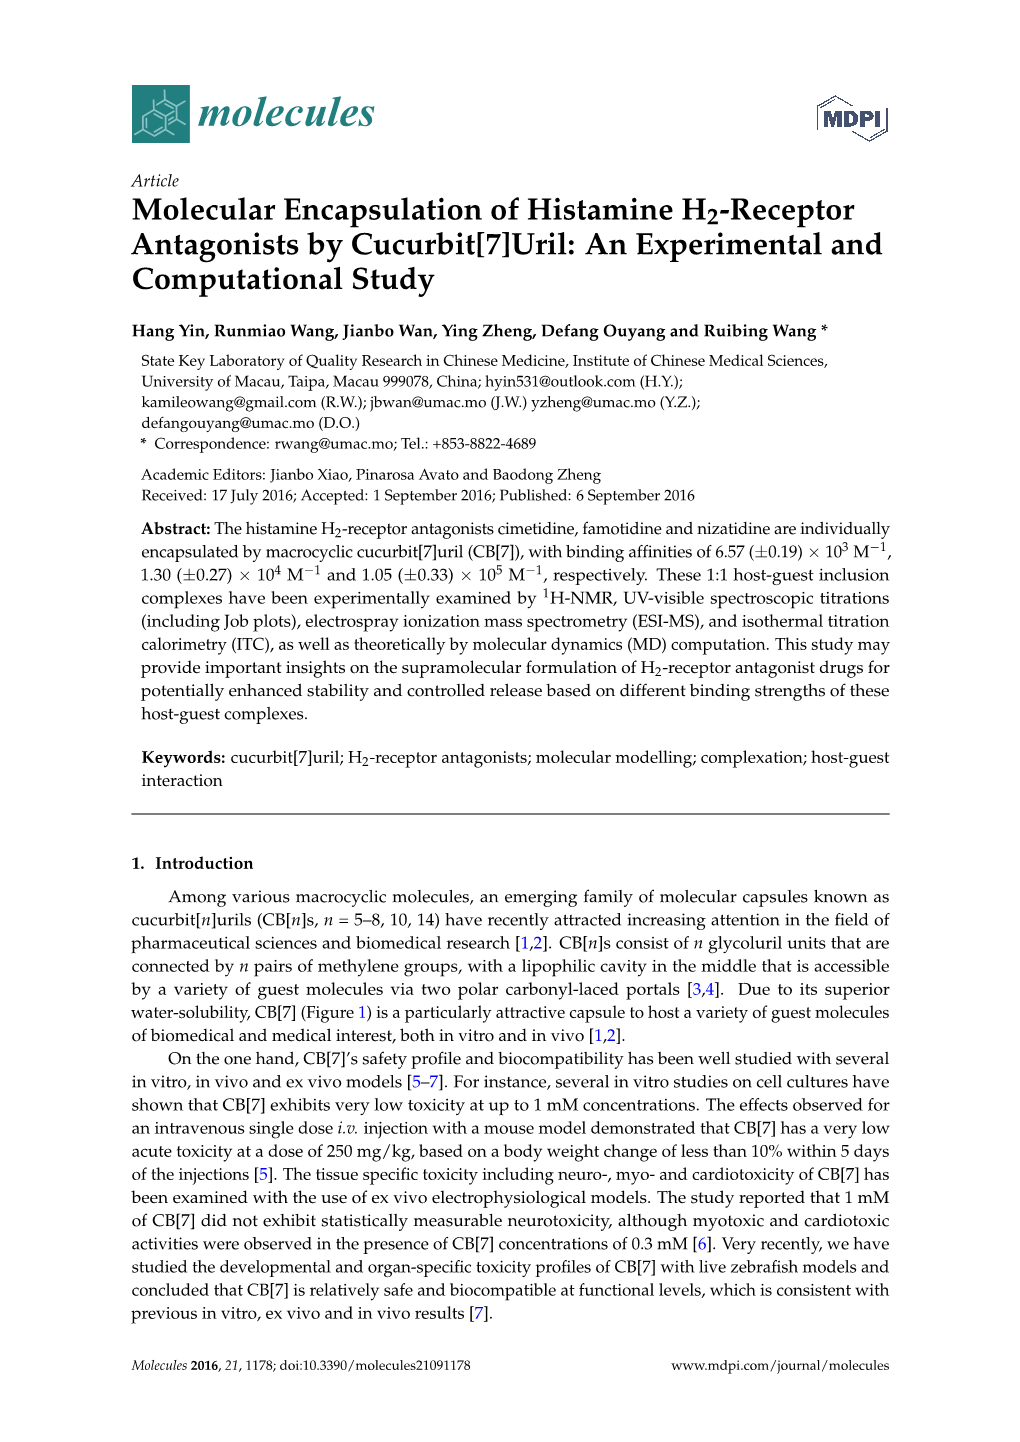 Molecular Encapsulation of Histamine H2-Receptor Antagonists by Cucurbit[7]Uril: an Experimental and Computational Study